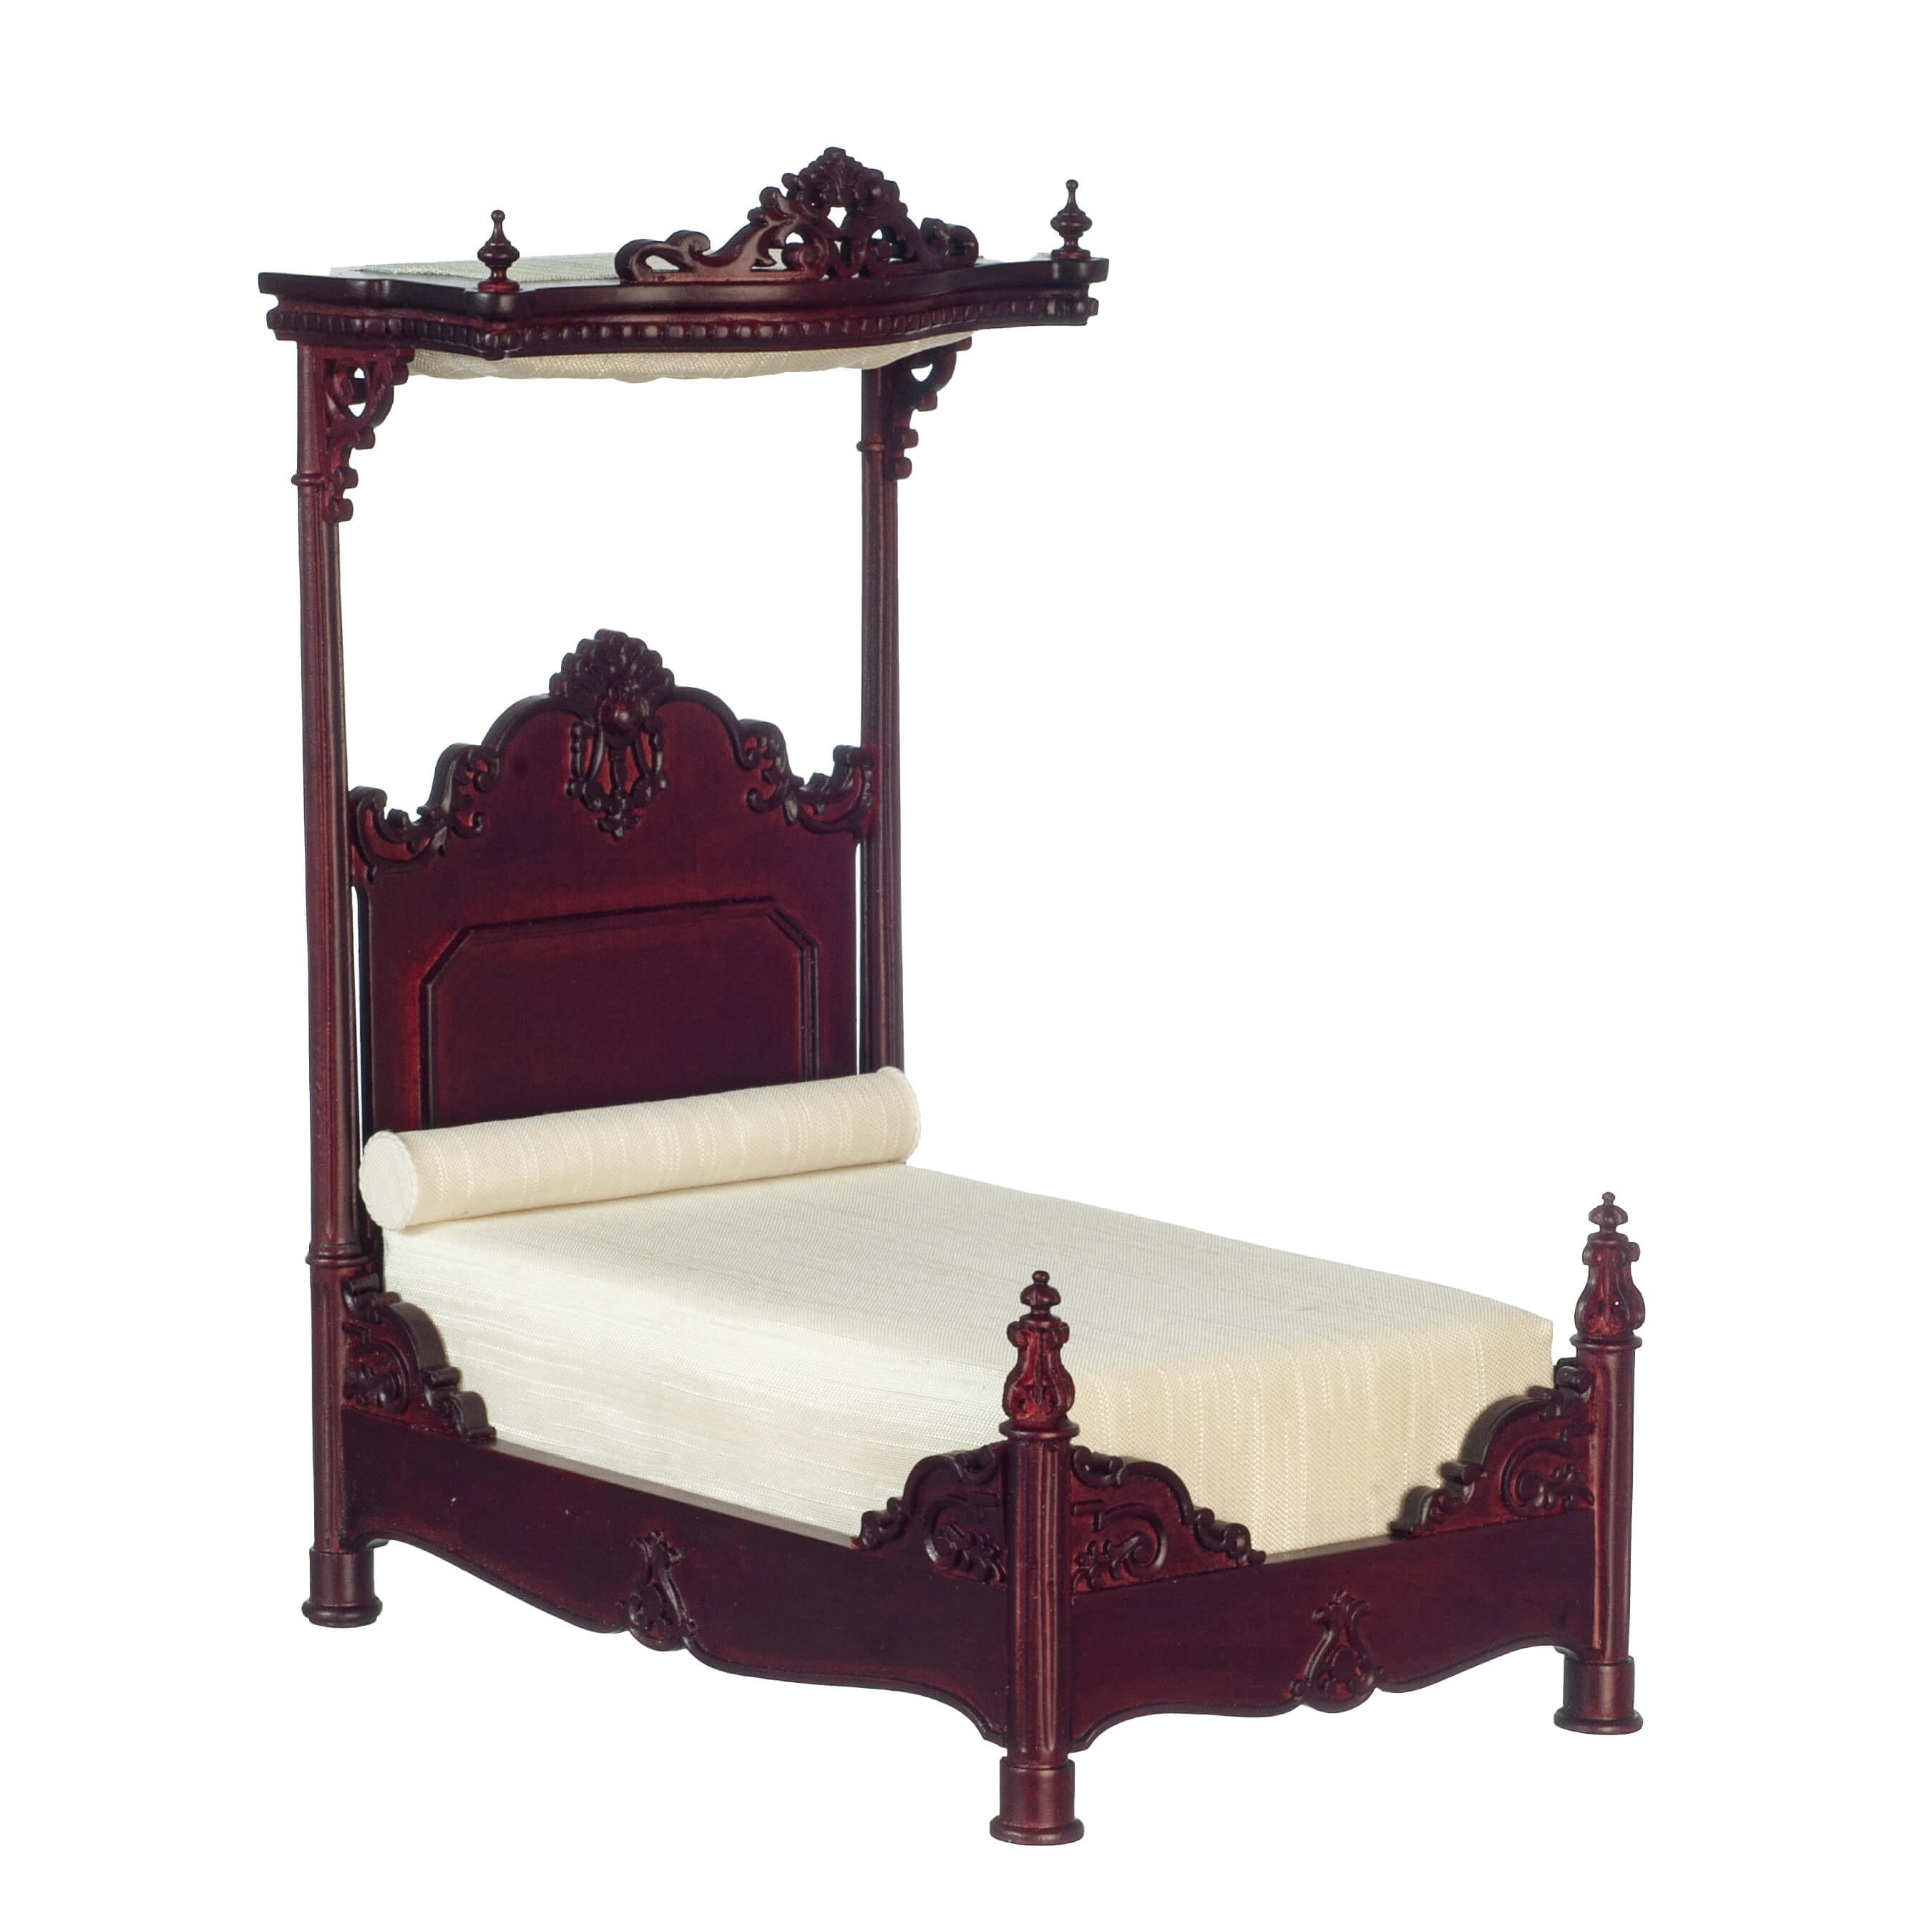 1860 Hand Carved Timber Victorian Half Tester Bed - Mahogany